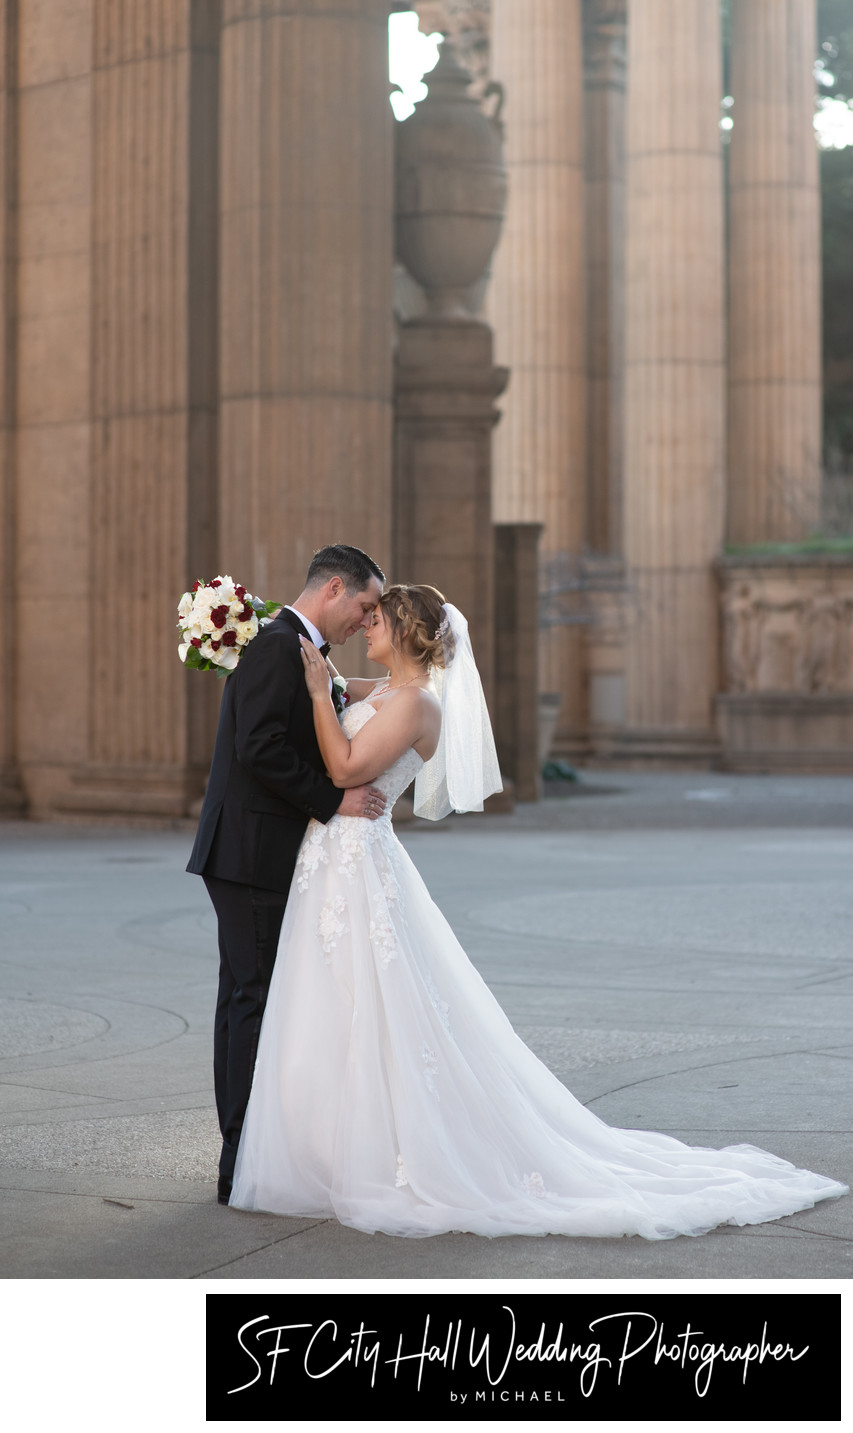 Wedding Photography Palace of Fine Arts in San Francisco